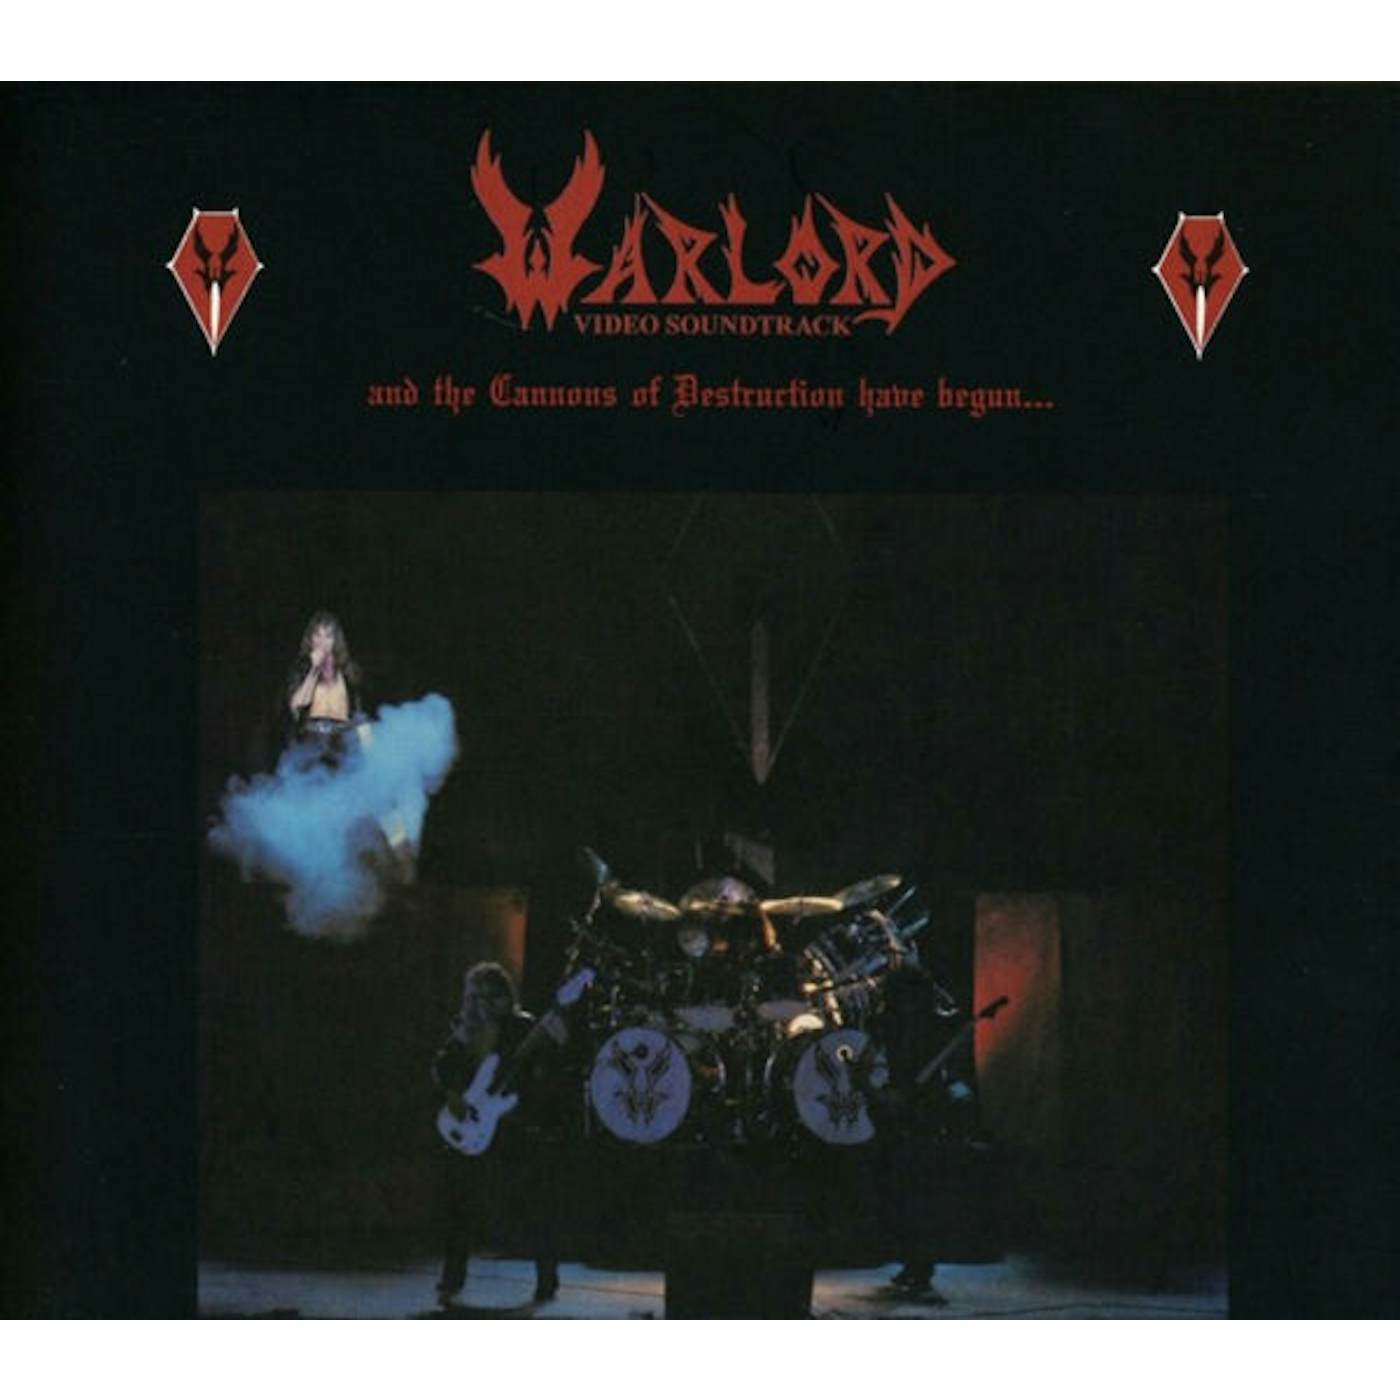 Warlord LP - And The Cannons Of Destruction Have Begun (Vinyl)